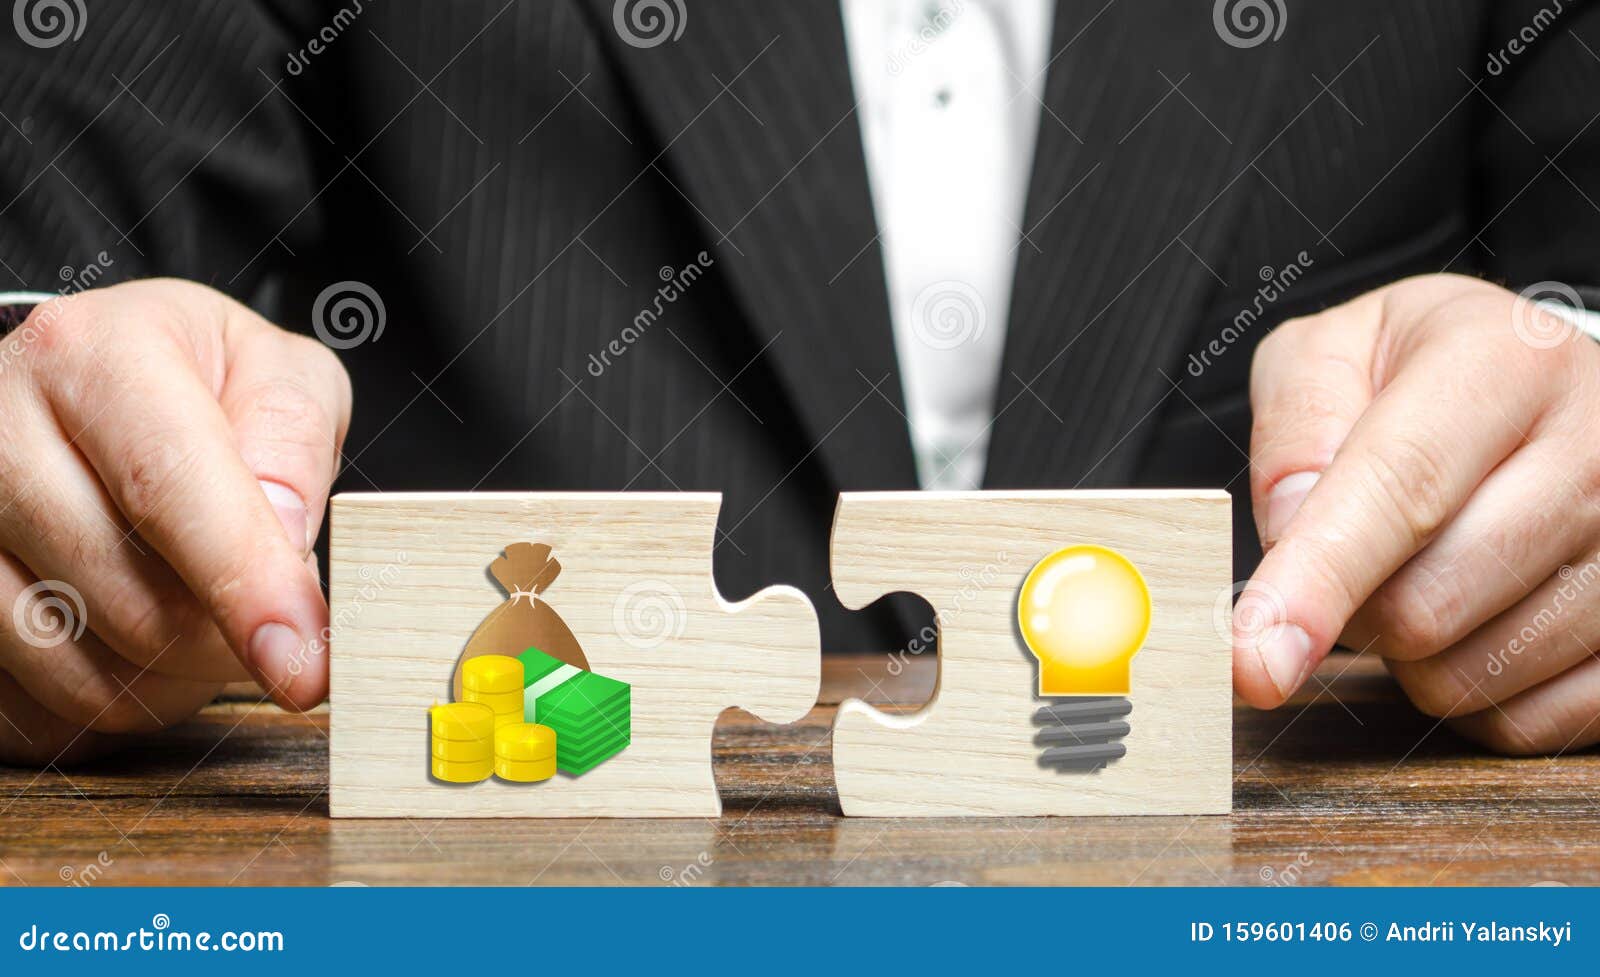 businessman puts two puzzles with the image of money and an idea bulb. financing promising startups and crowdfunding